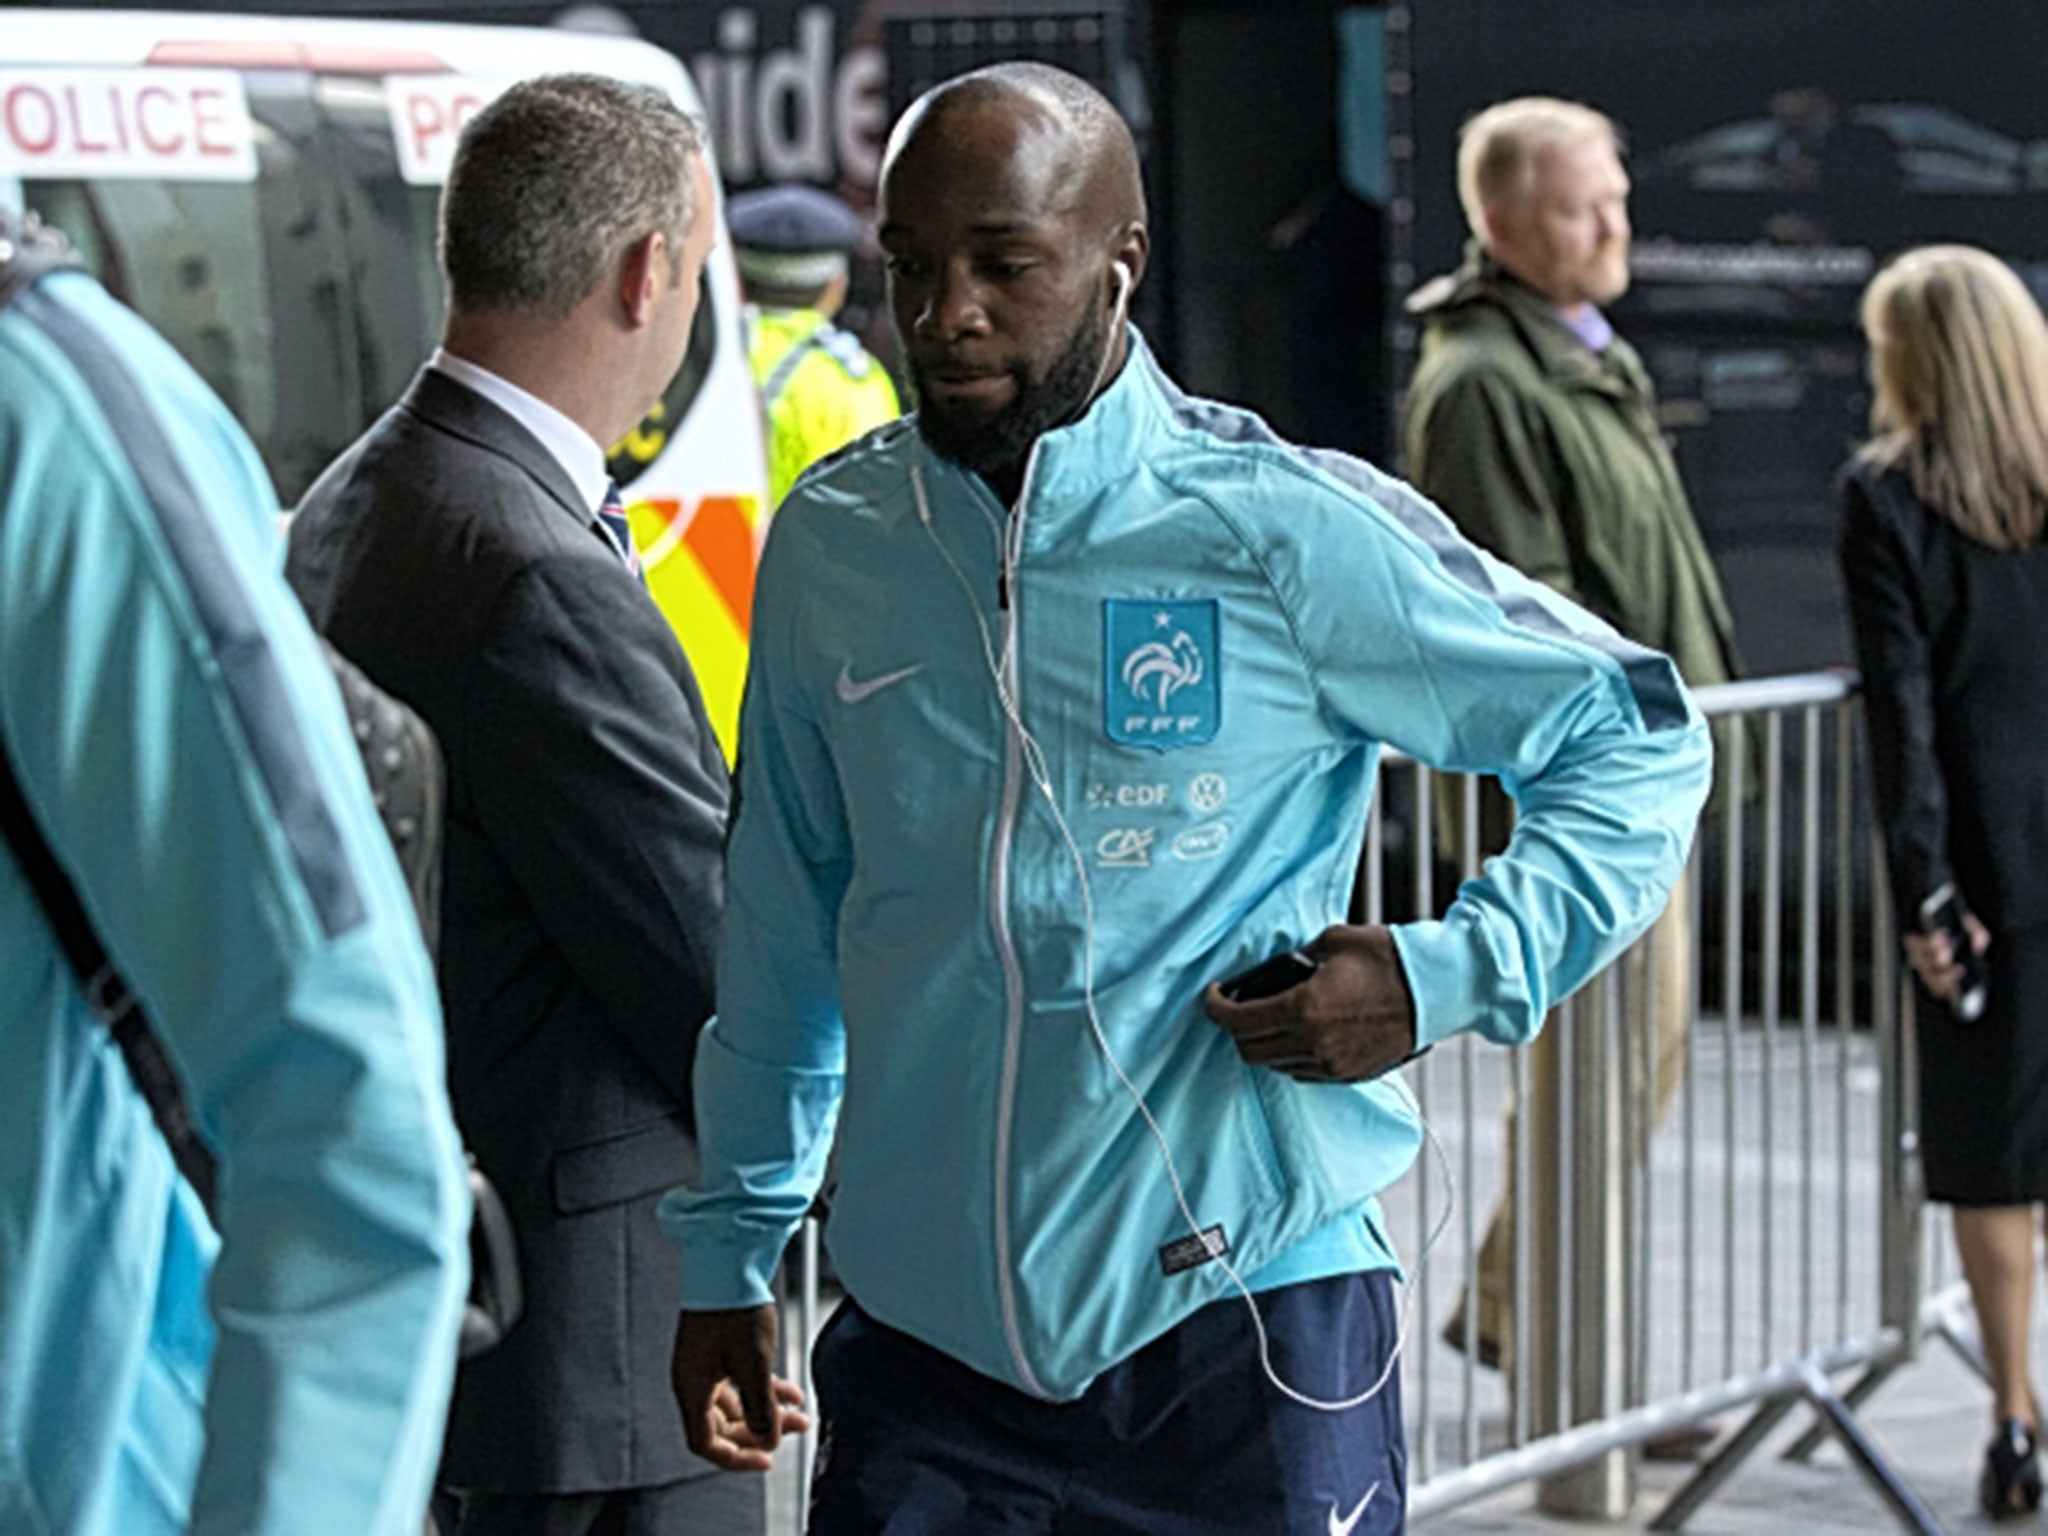 France midfielder Lassana Diarra, whose cousin was killed in the Paris attacks, arrives at the team’s London hotel